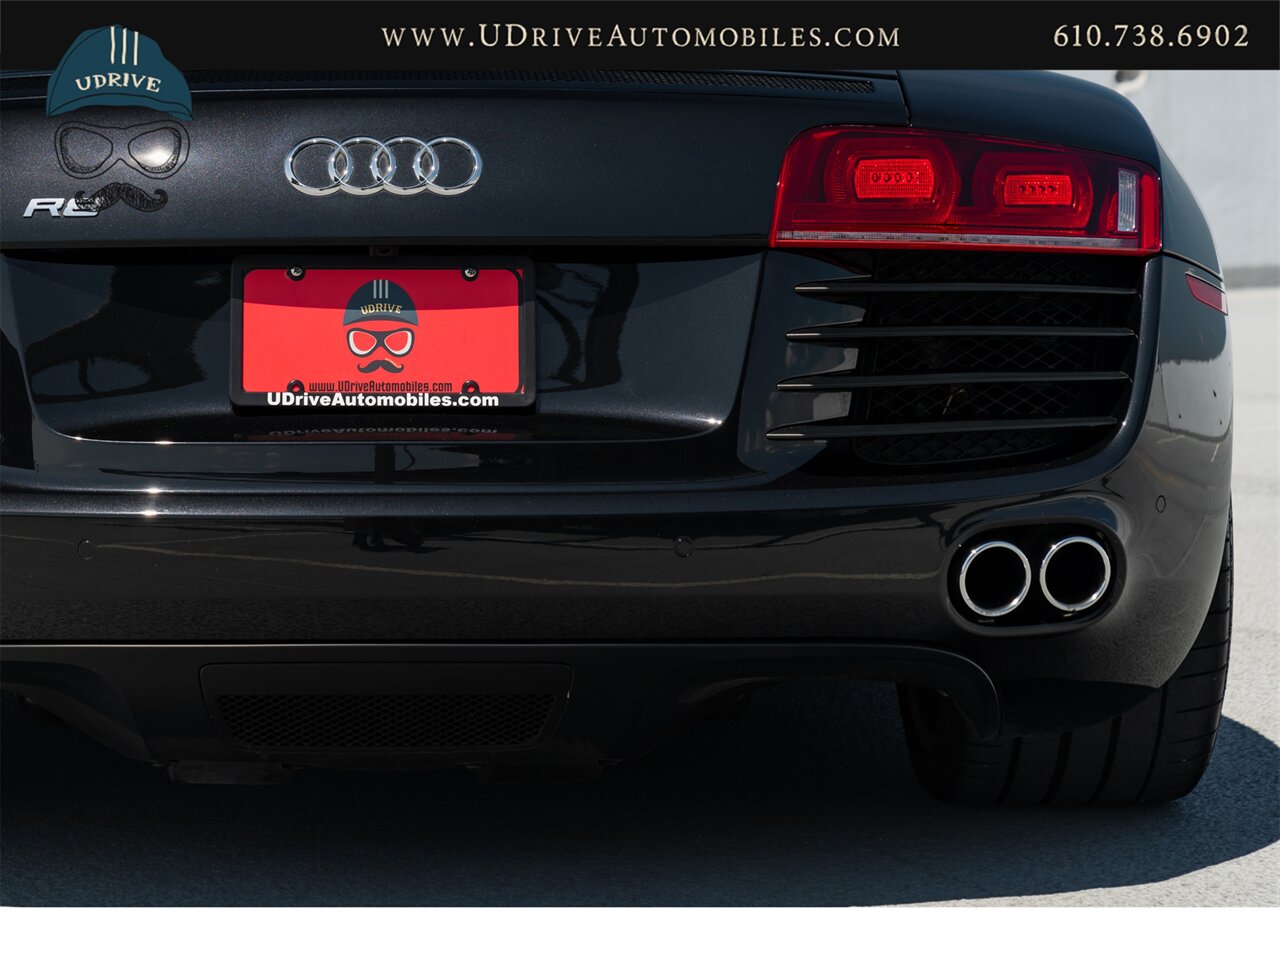 2012 Audi R8 4.2 Quattro  6 Speed Manual 1 Owner Service History - Photo 20 - West Chester, PA 19382